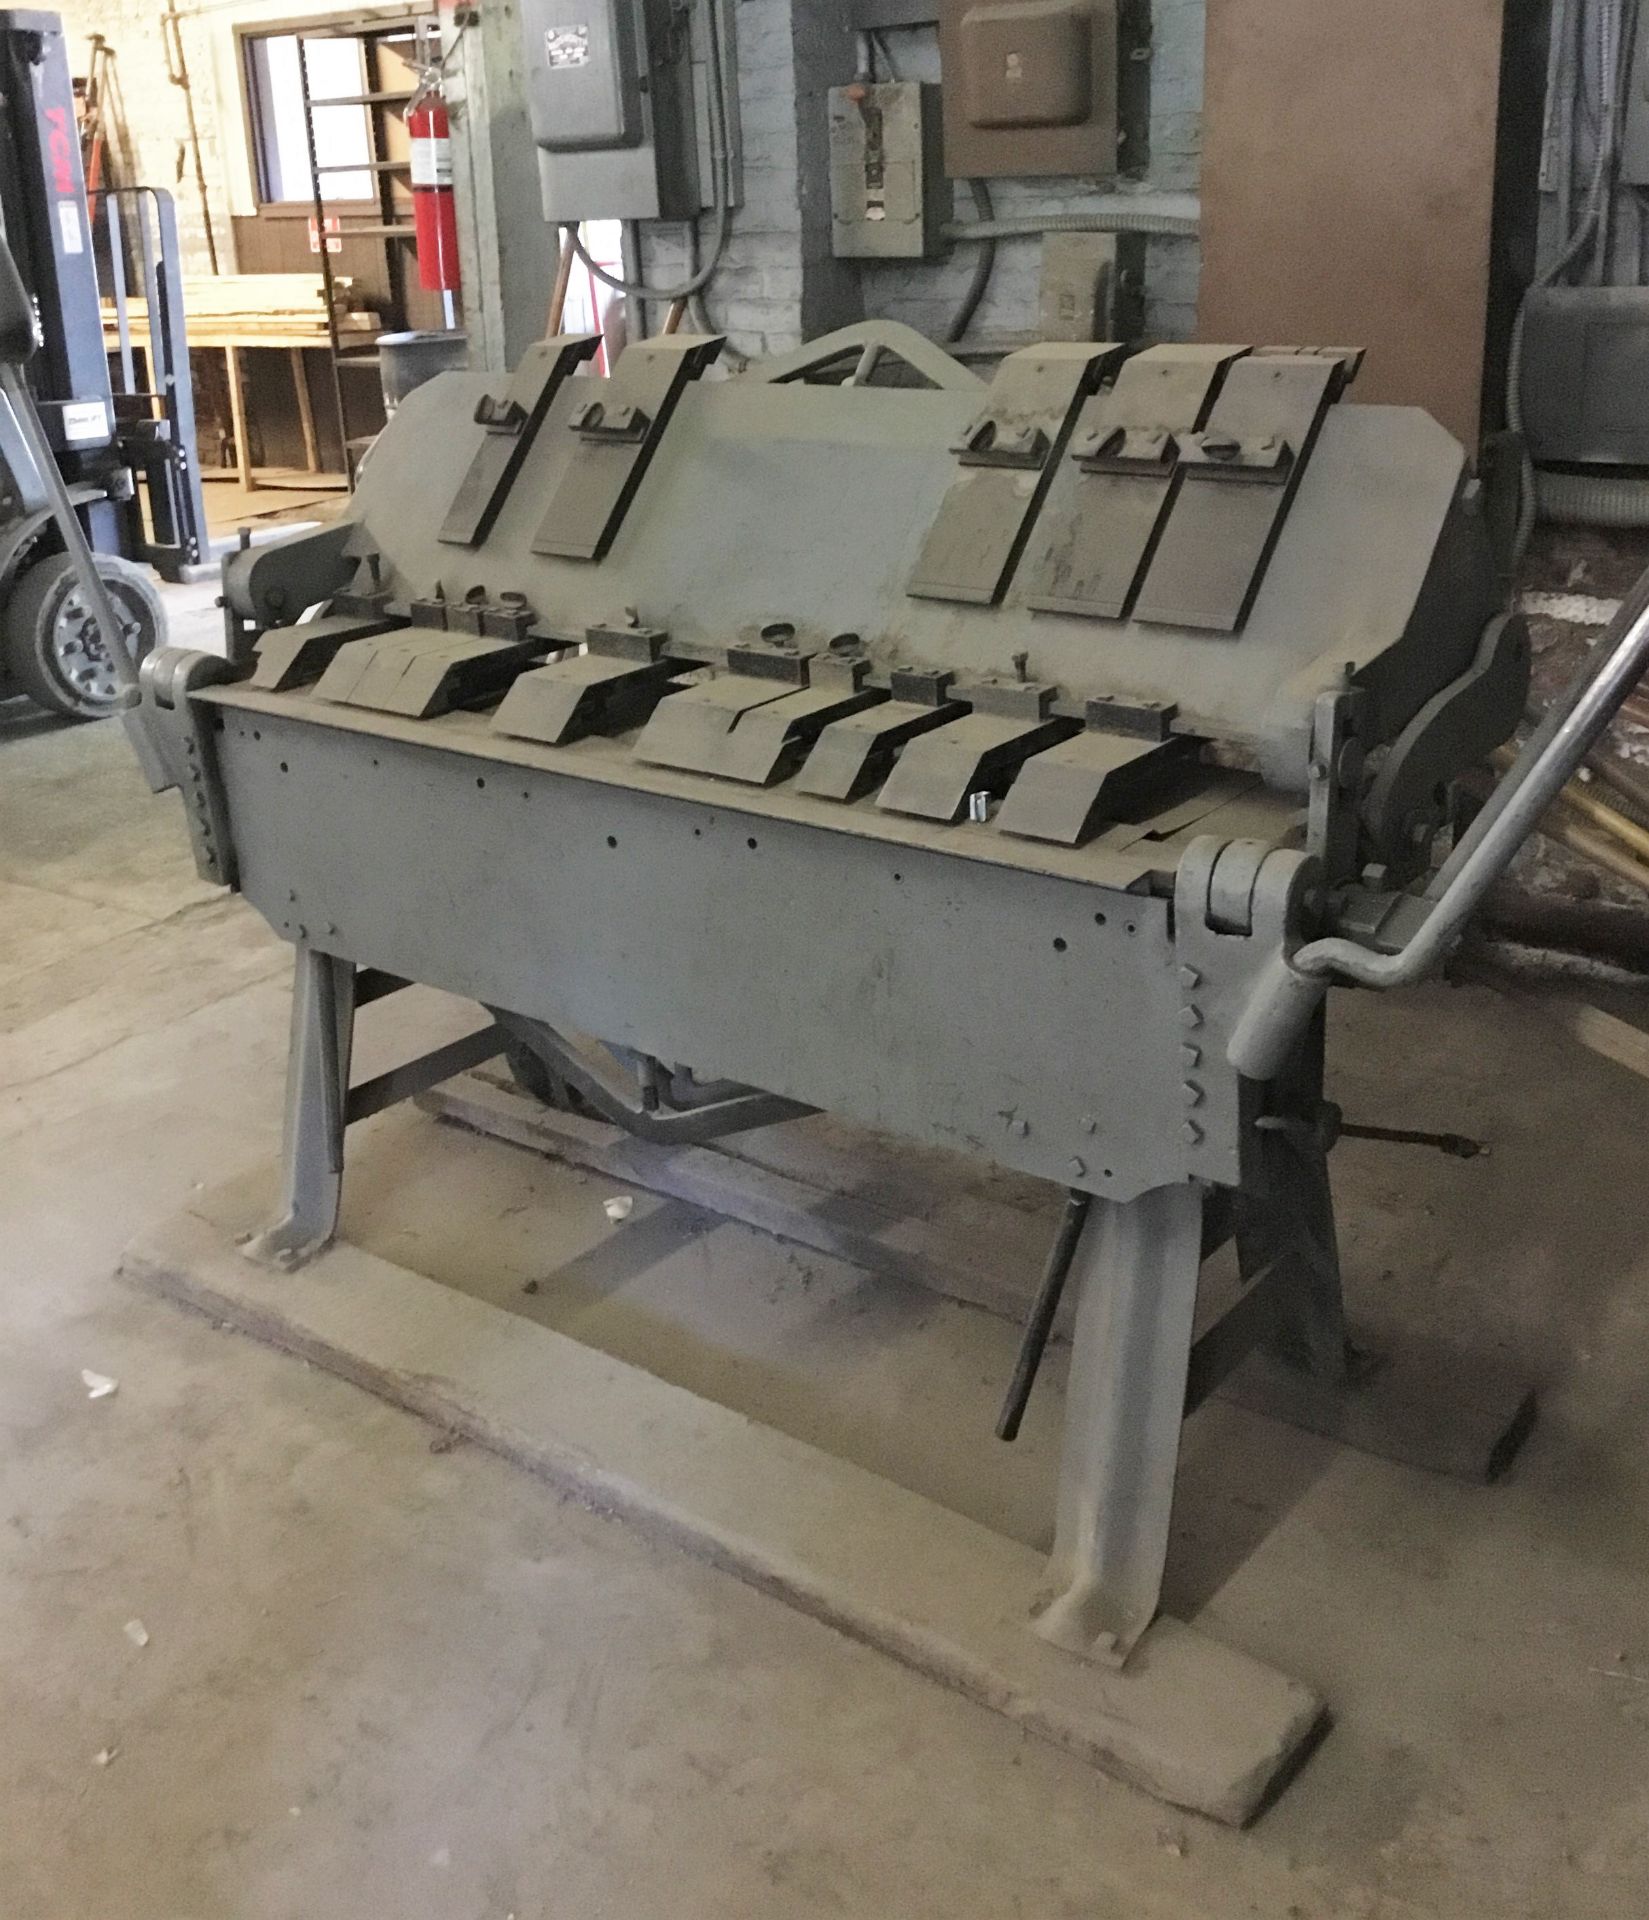 CHICAGO MDL. W-35 5’ X 12 GA. BOX & PAN BRAKE, WITH 5’ OF “FINGERS”, S/N: 92316